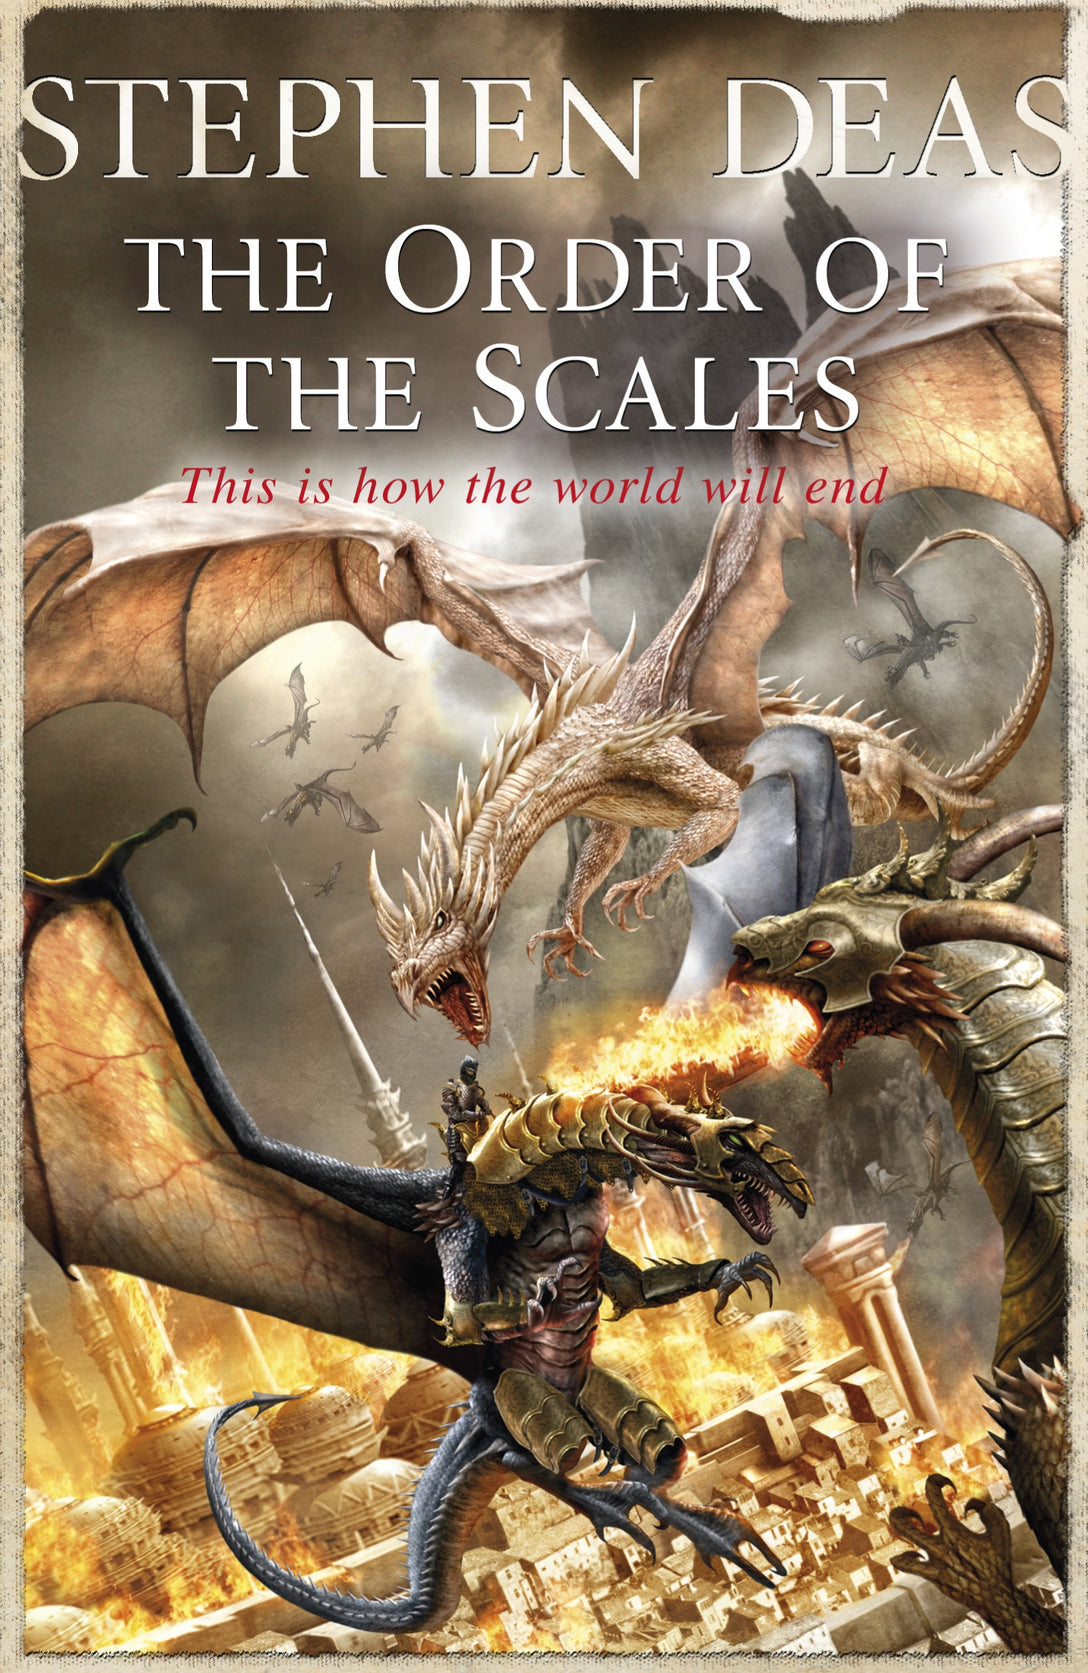 The Order of the Scales by Stephen Deas